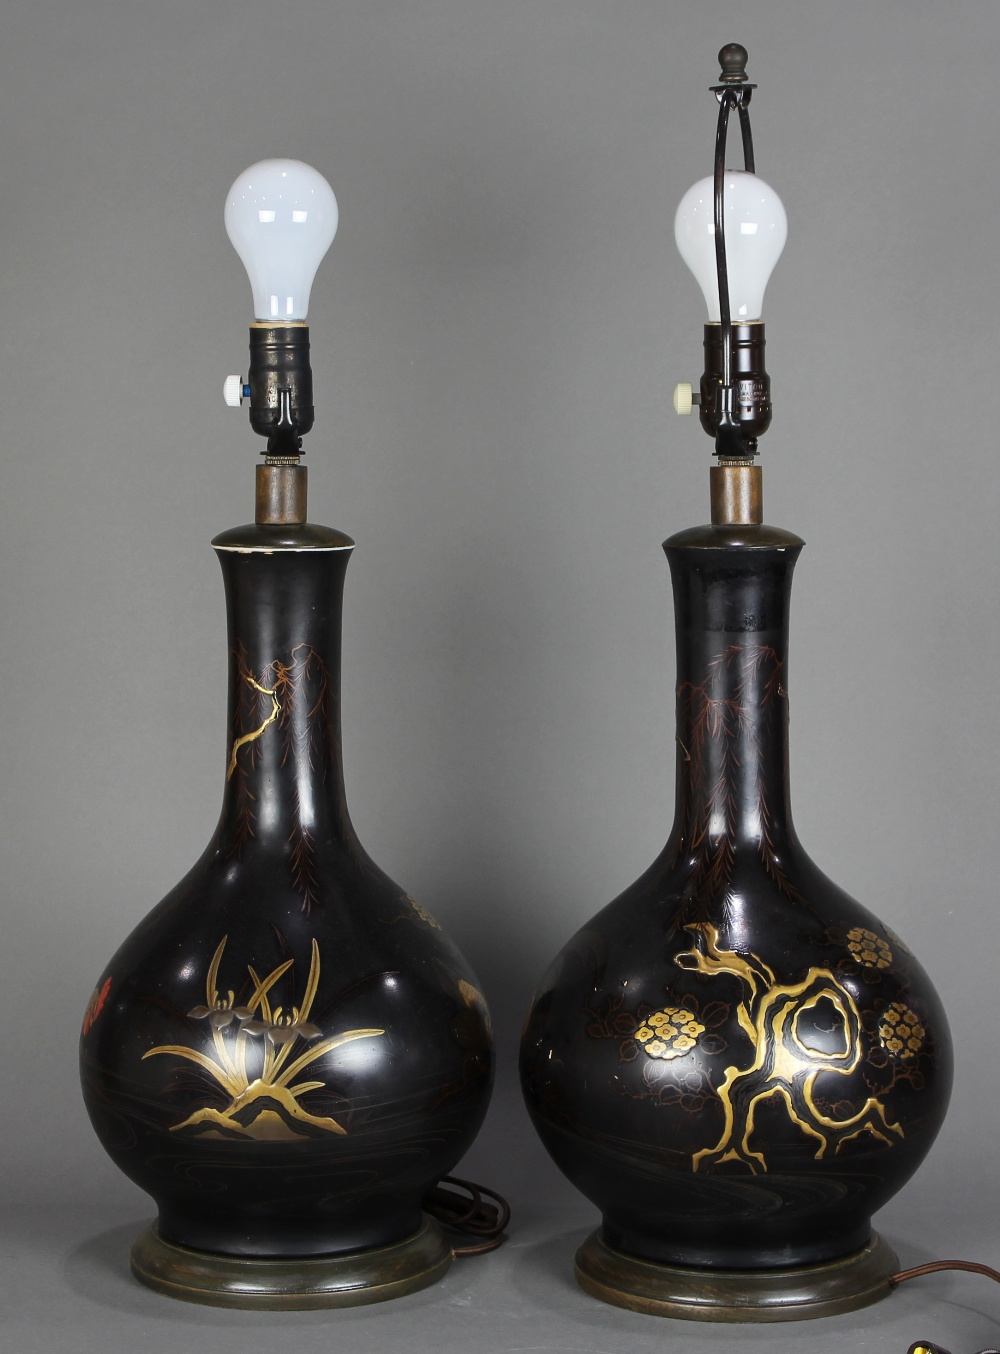 Pair of Japanese bronze vases, converted to lamps, Meiji/Taisho period, decorated with willow - Image 2 of 5